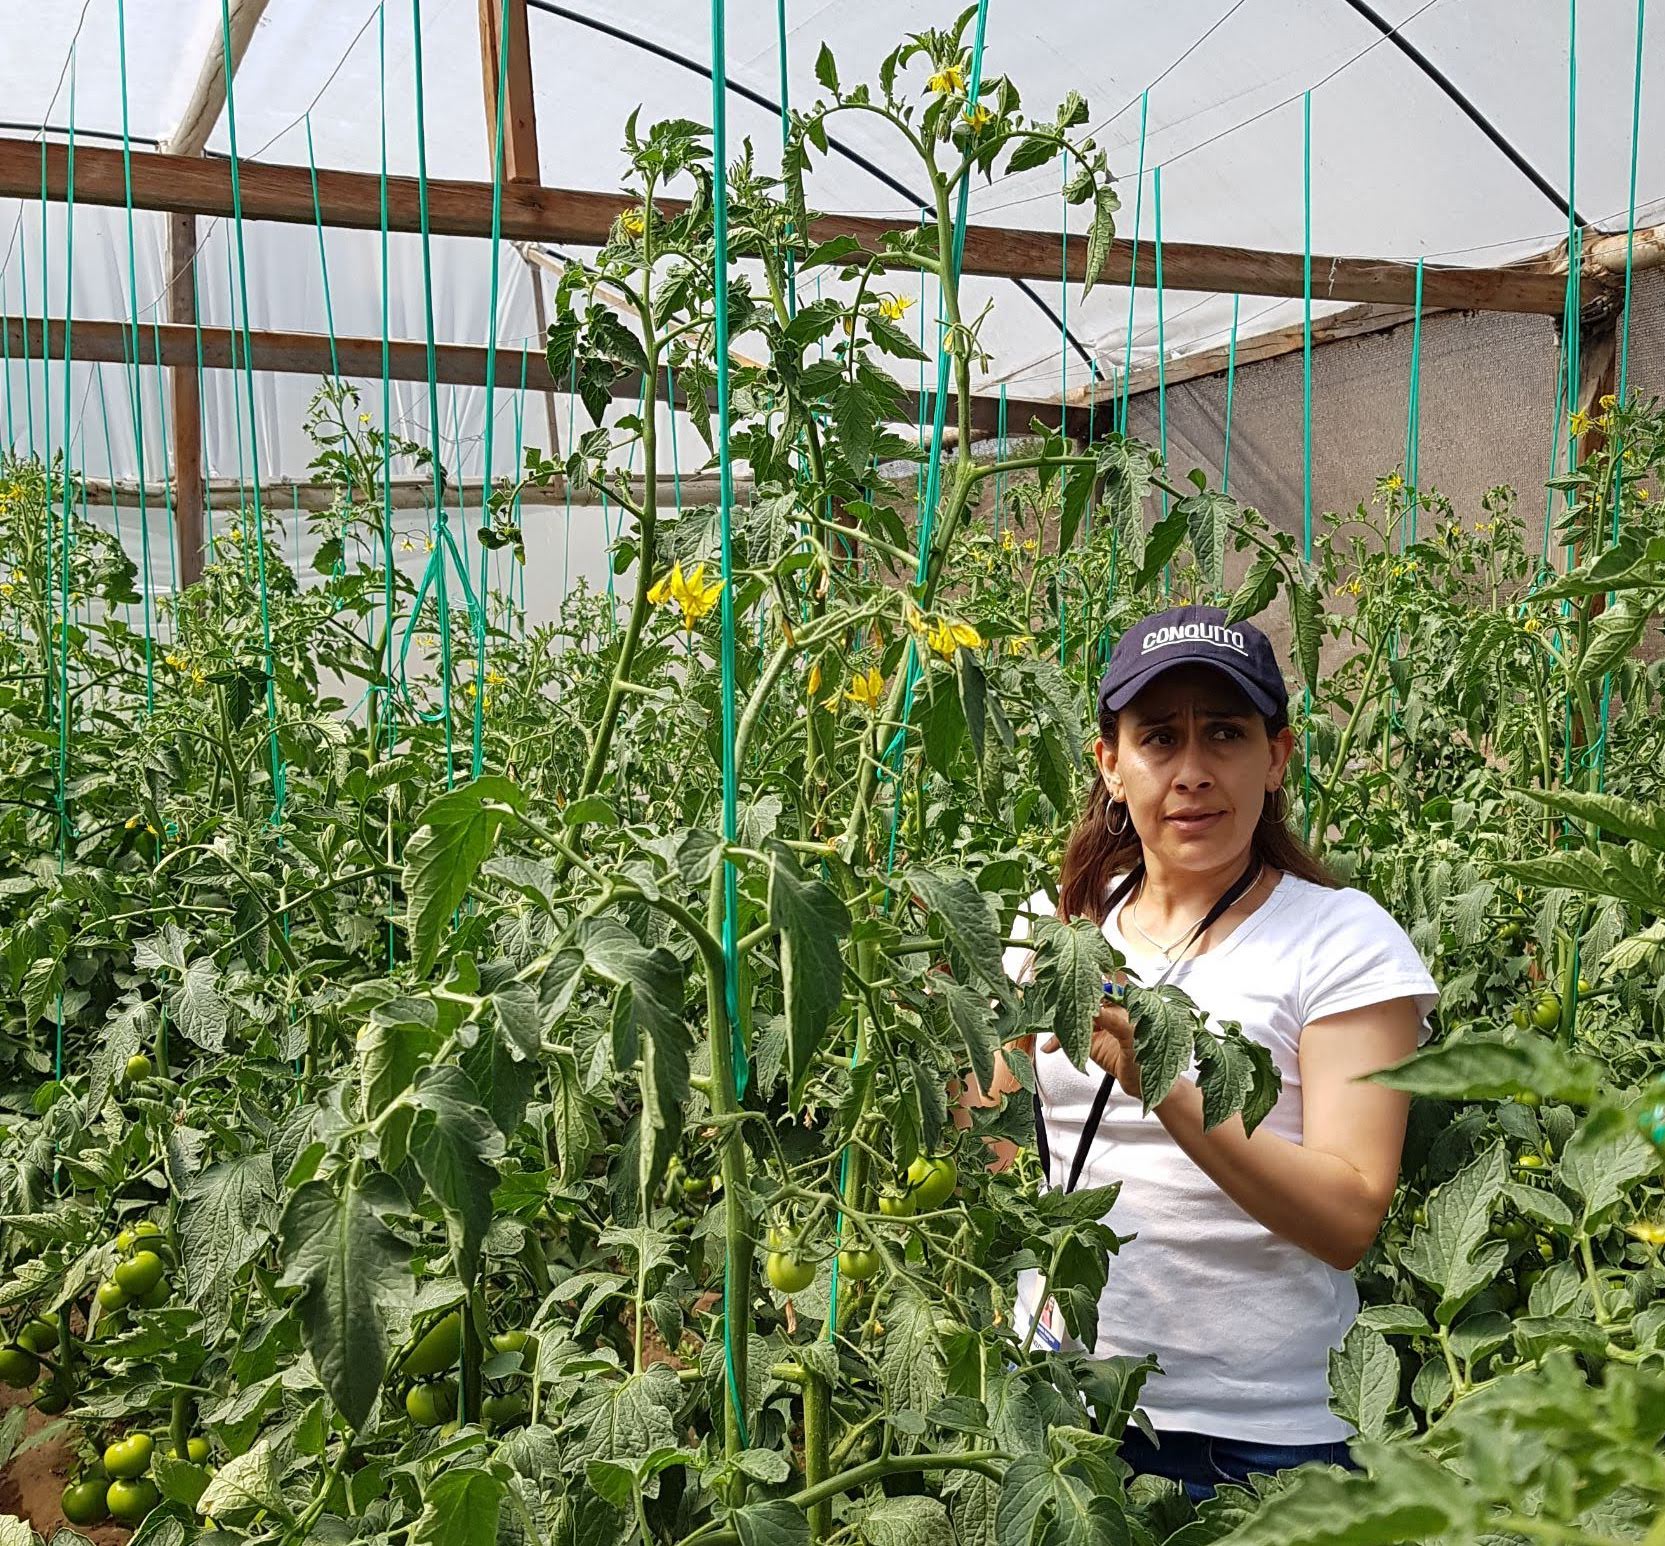 A photo of a woman wearing a white t-shirt and black baseball hat with long brown hair is standing in a greenhouse surrounded by tall tomato plants with yellow flowers and green fruit.